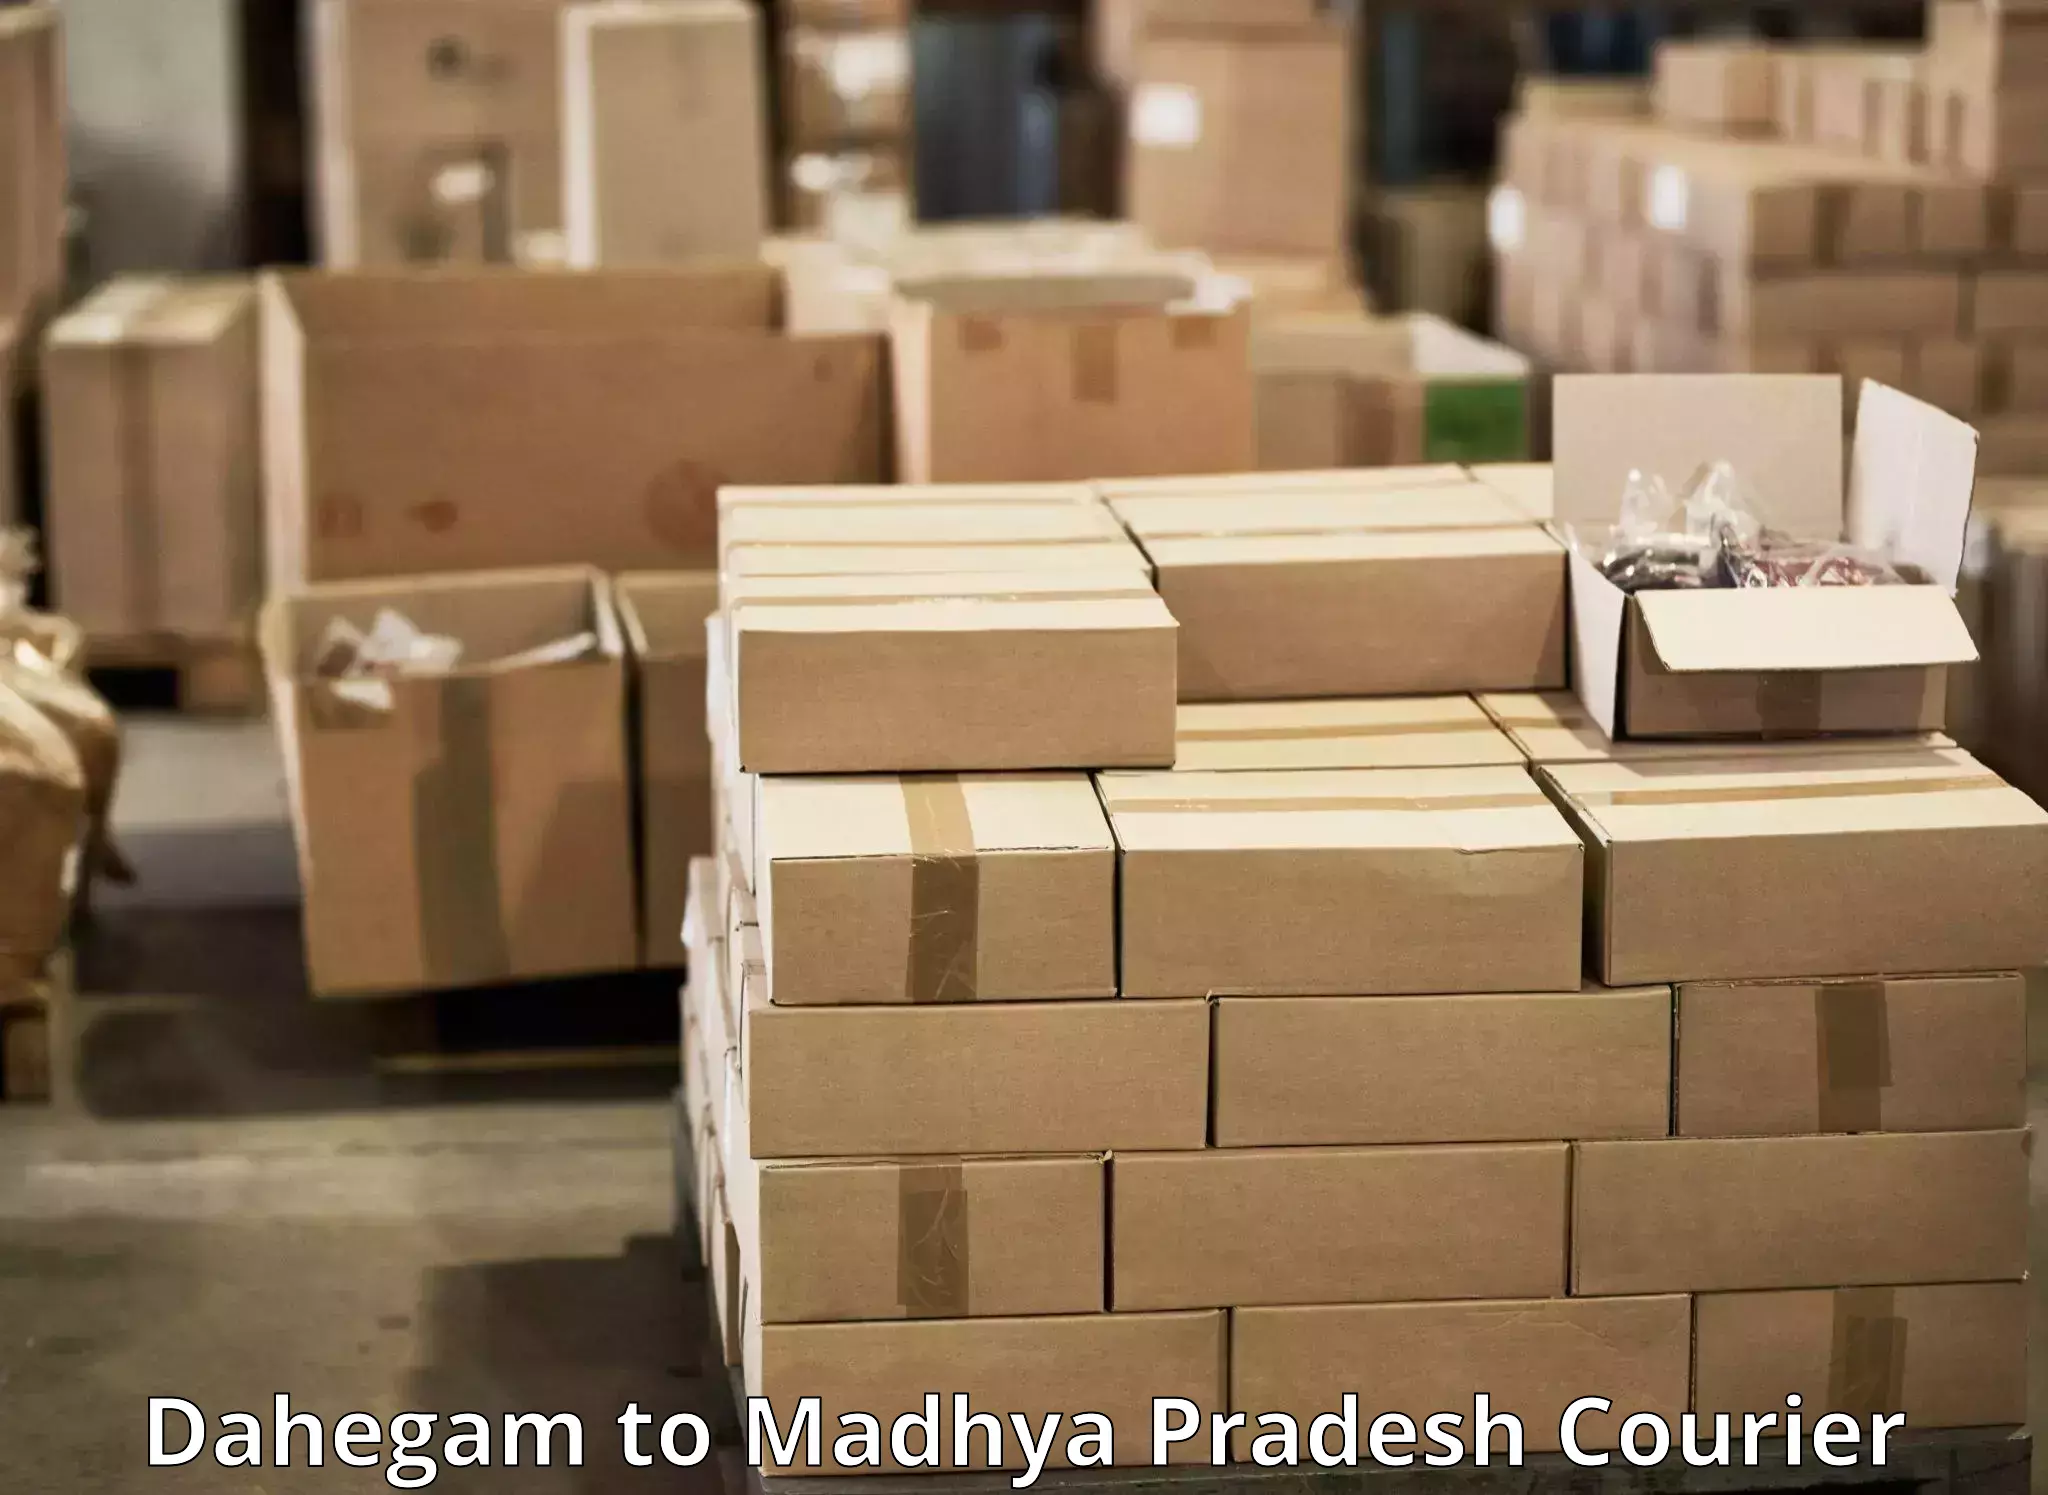 Express package handling Dahegam to Indore